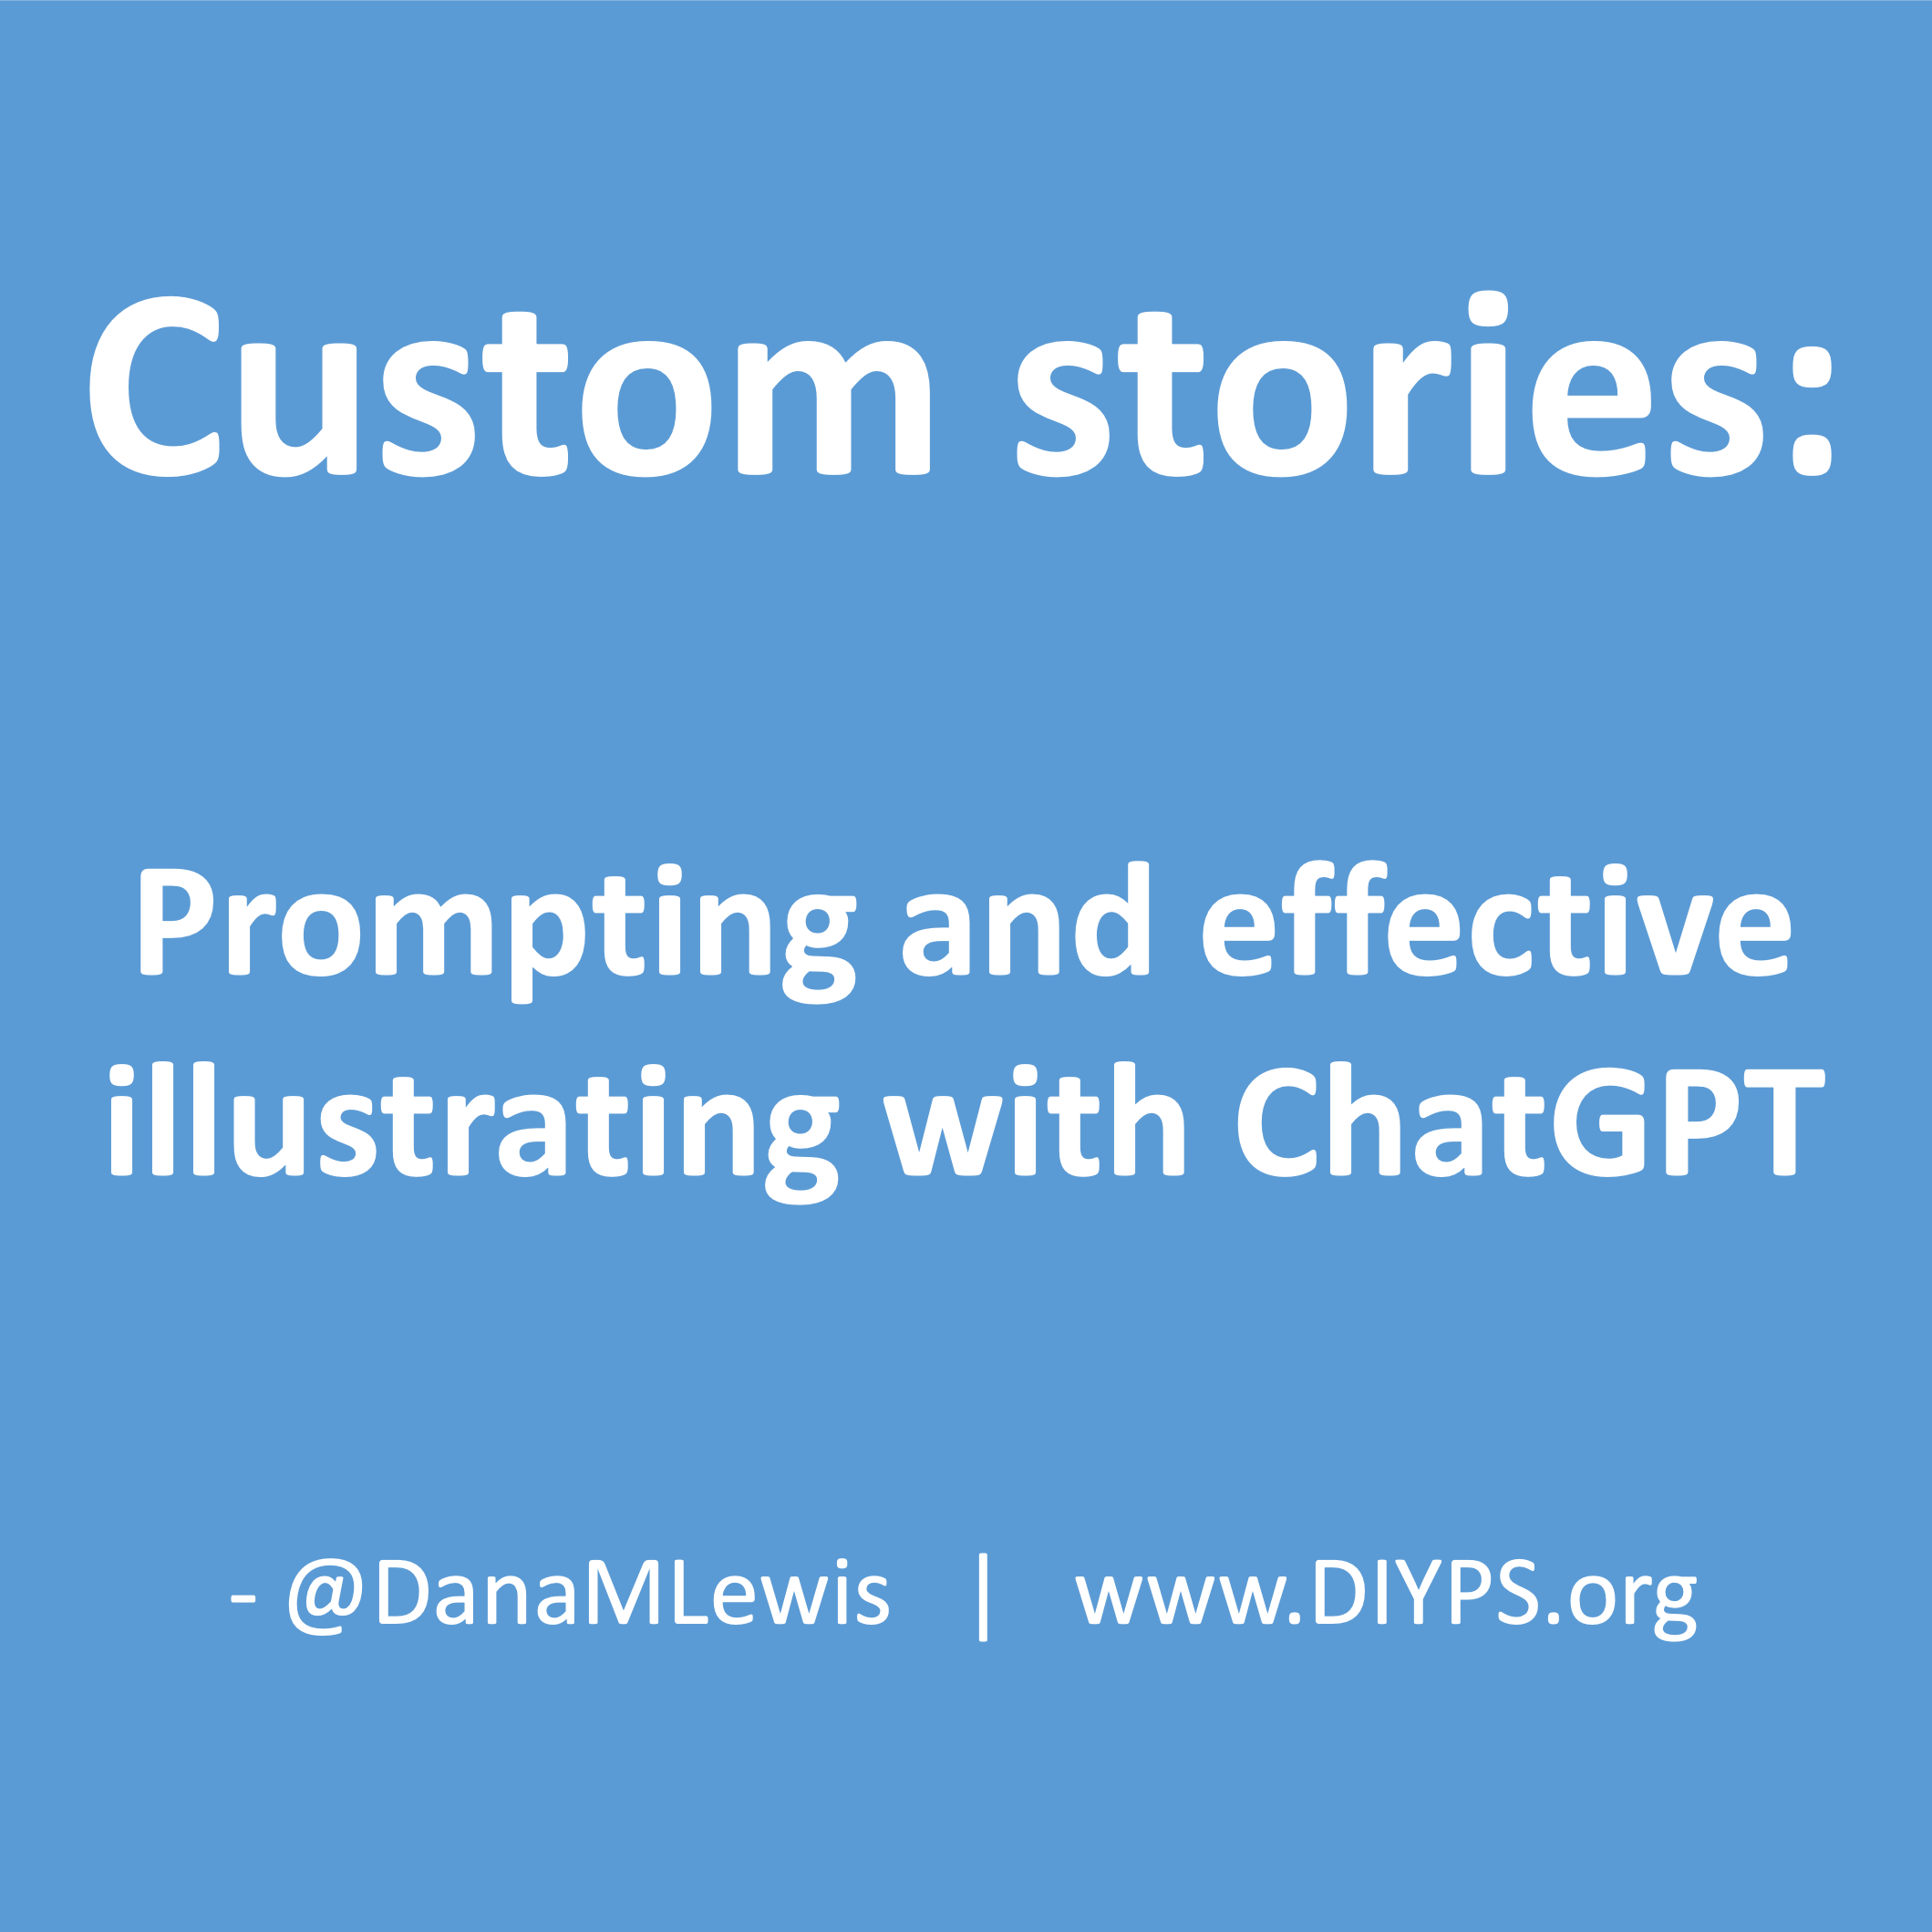 Custom stories: prompting and effective illustrating with ChatGPT, a blog post by Dana M. Lewis from DIYPS.org